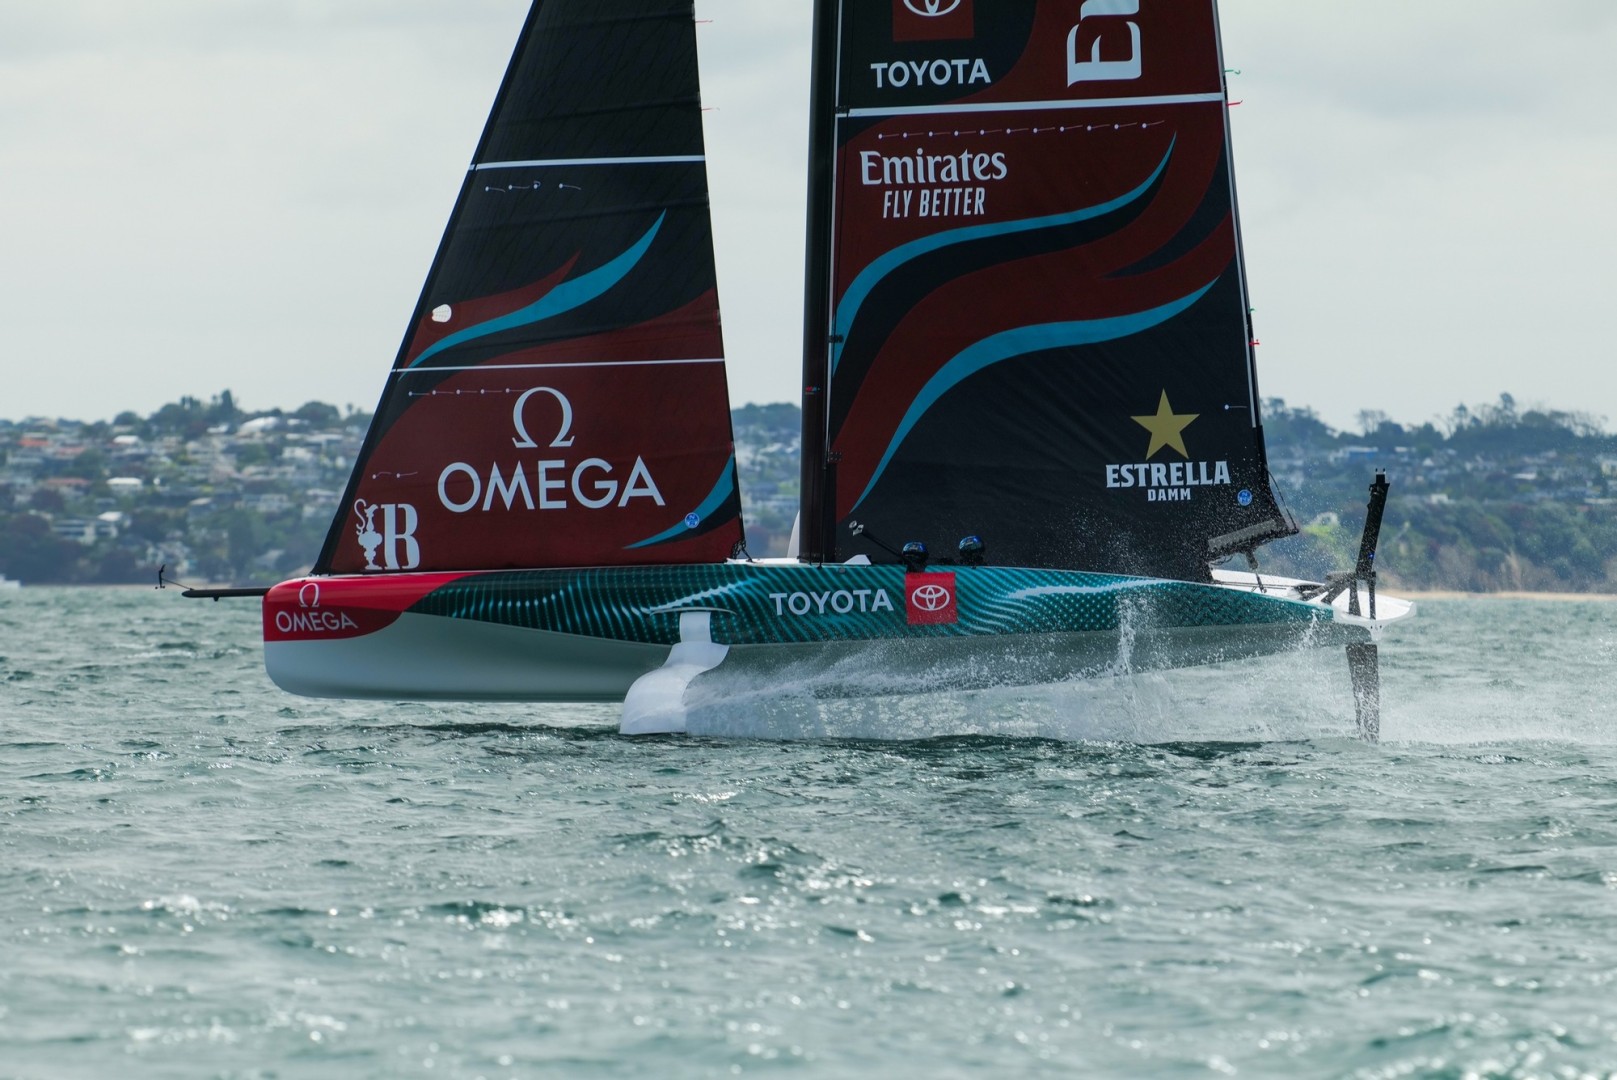 America's Cup, Kiwis dig into the foil data